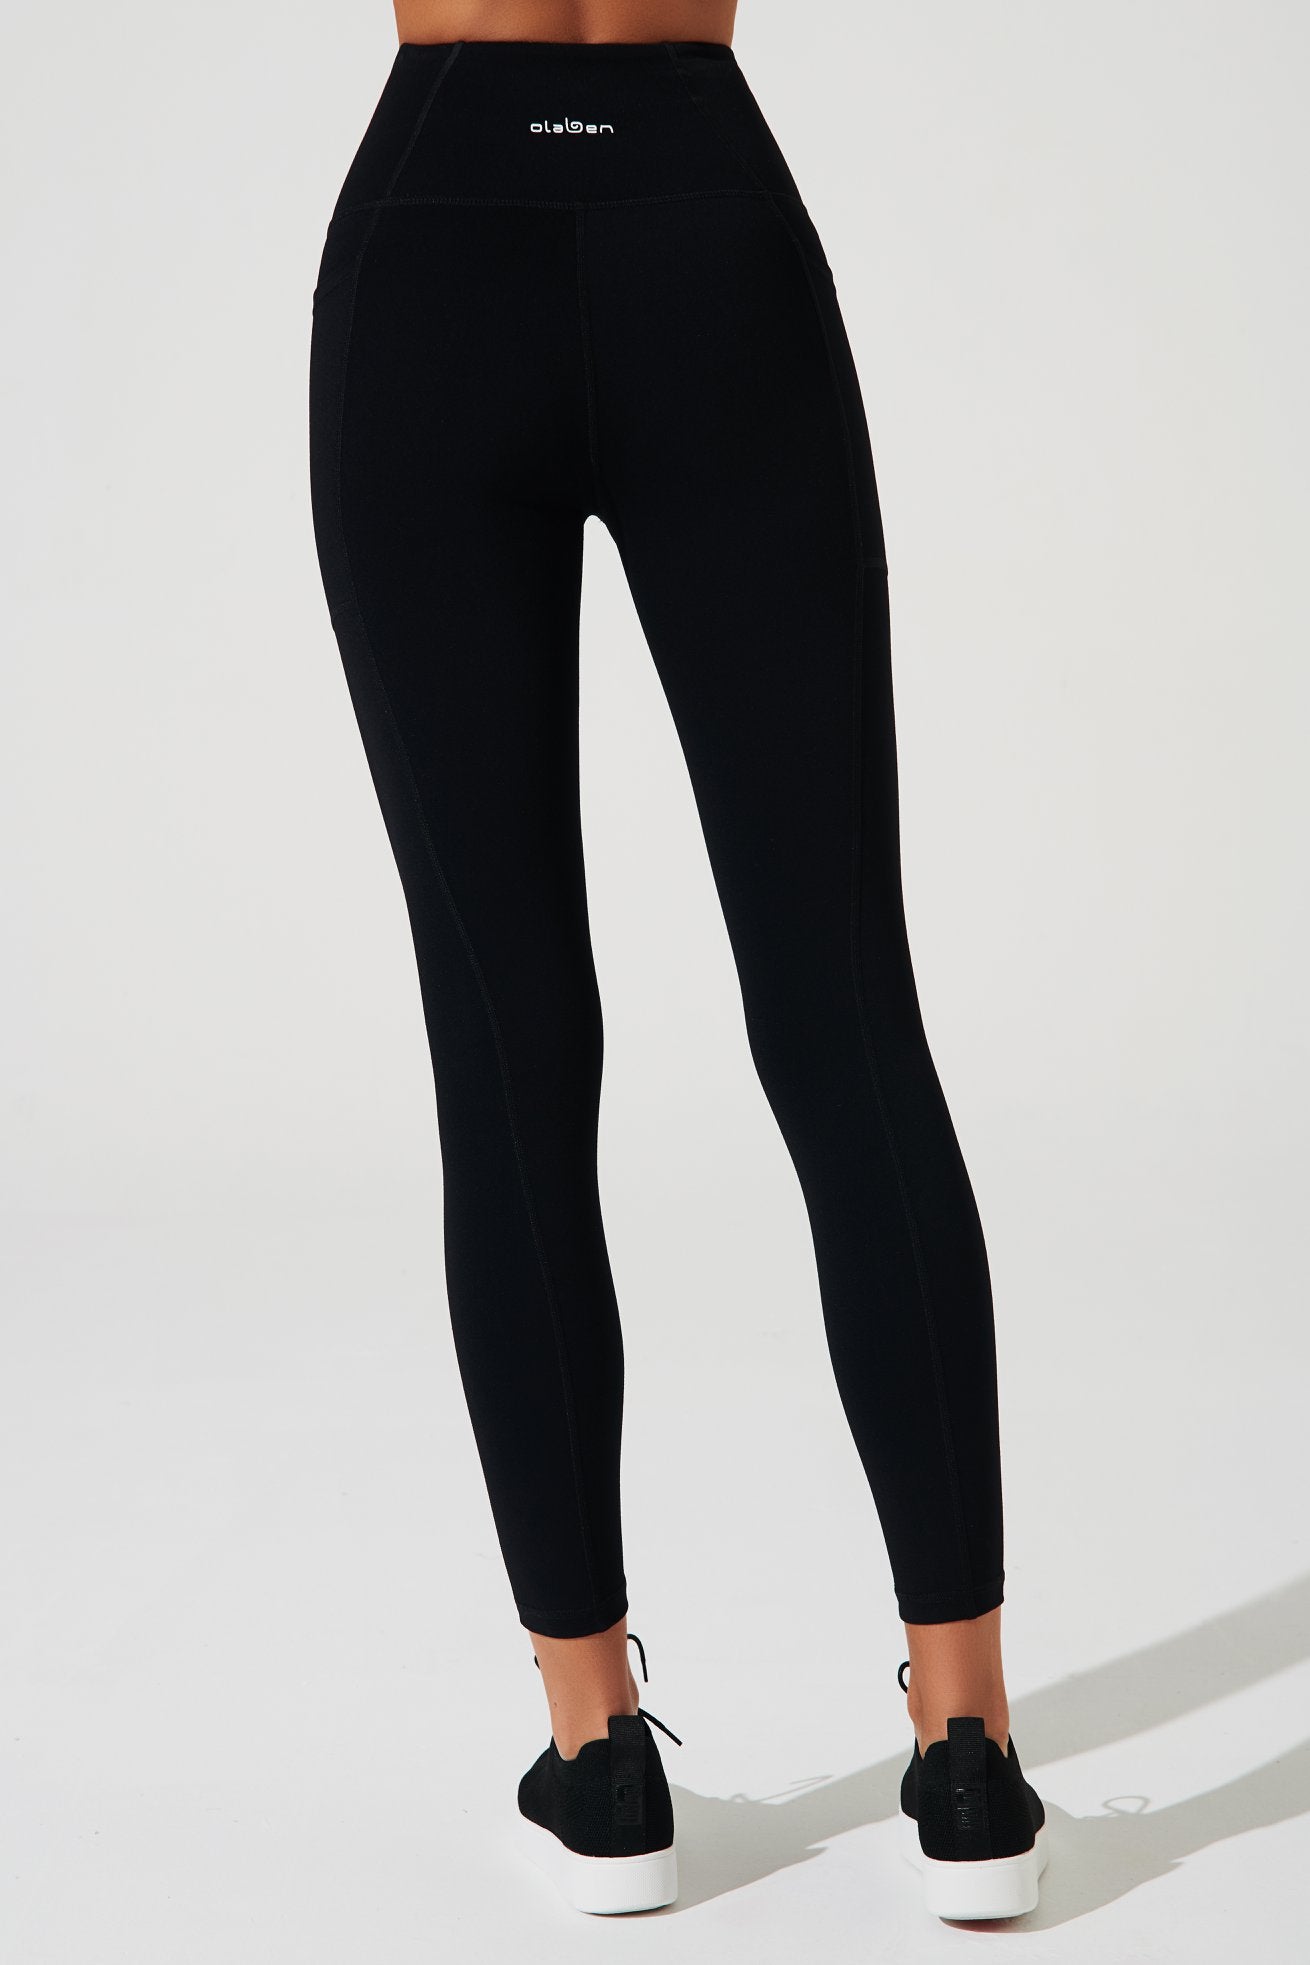 Black women's leggings by Julian Pocket, perfect for any occasion, style, and comfort.